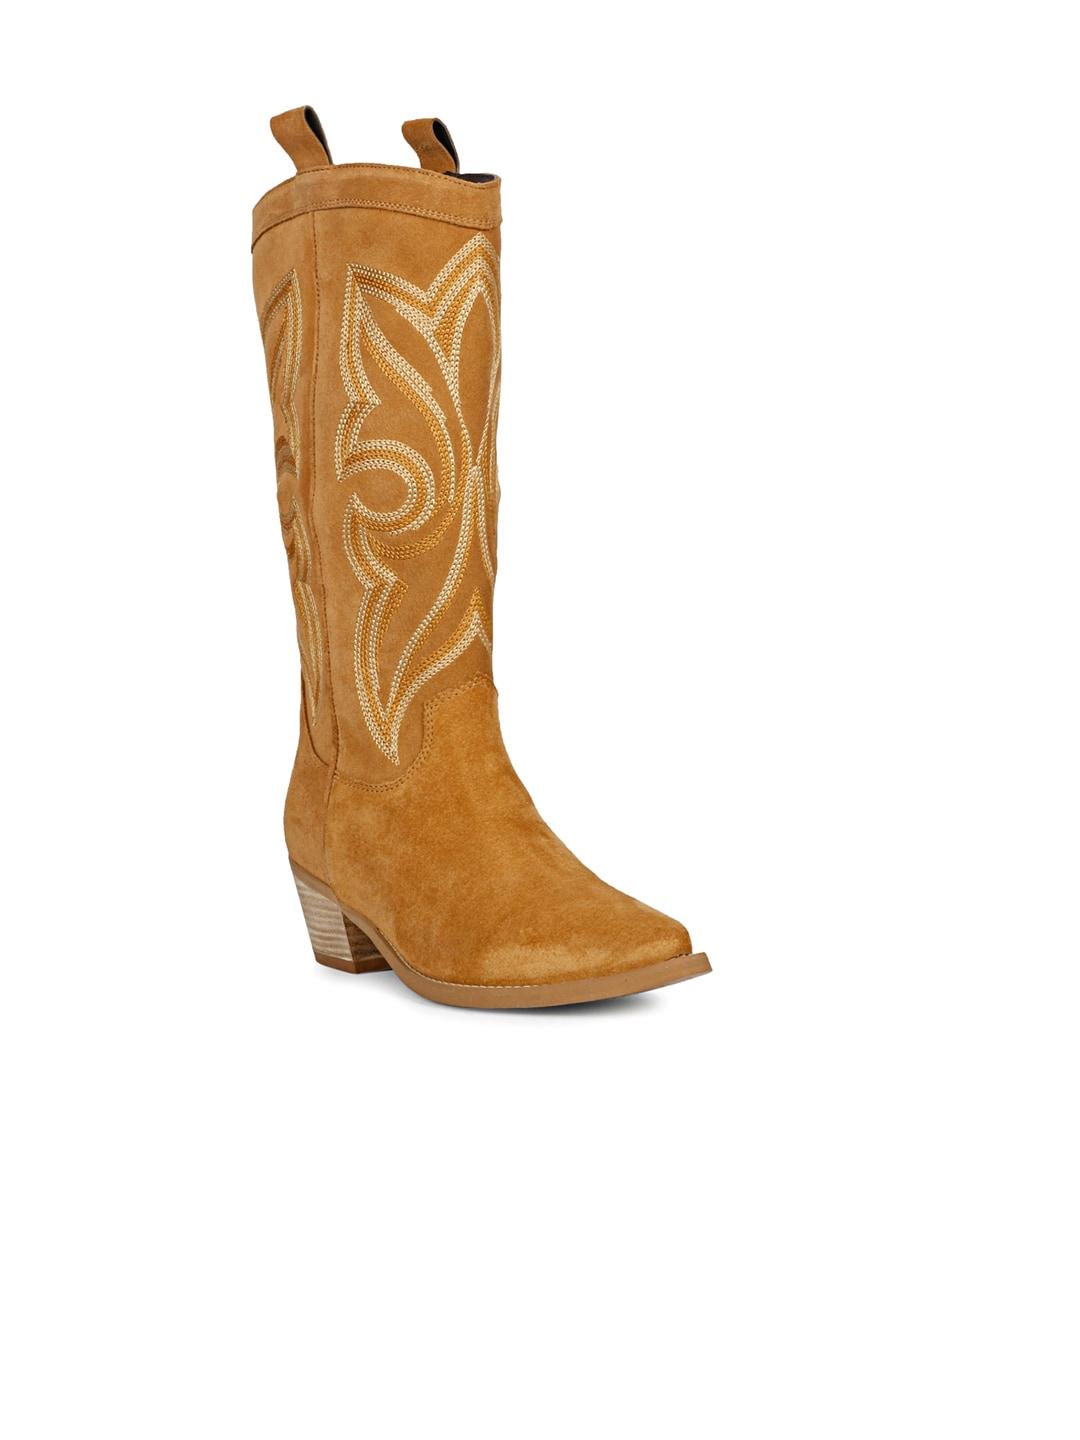 saint g women embroidered genuine leather cowboy boots